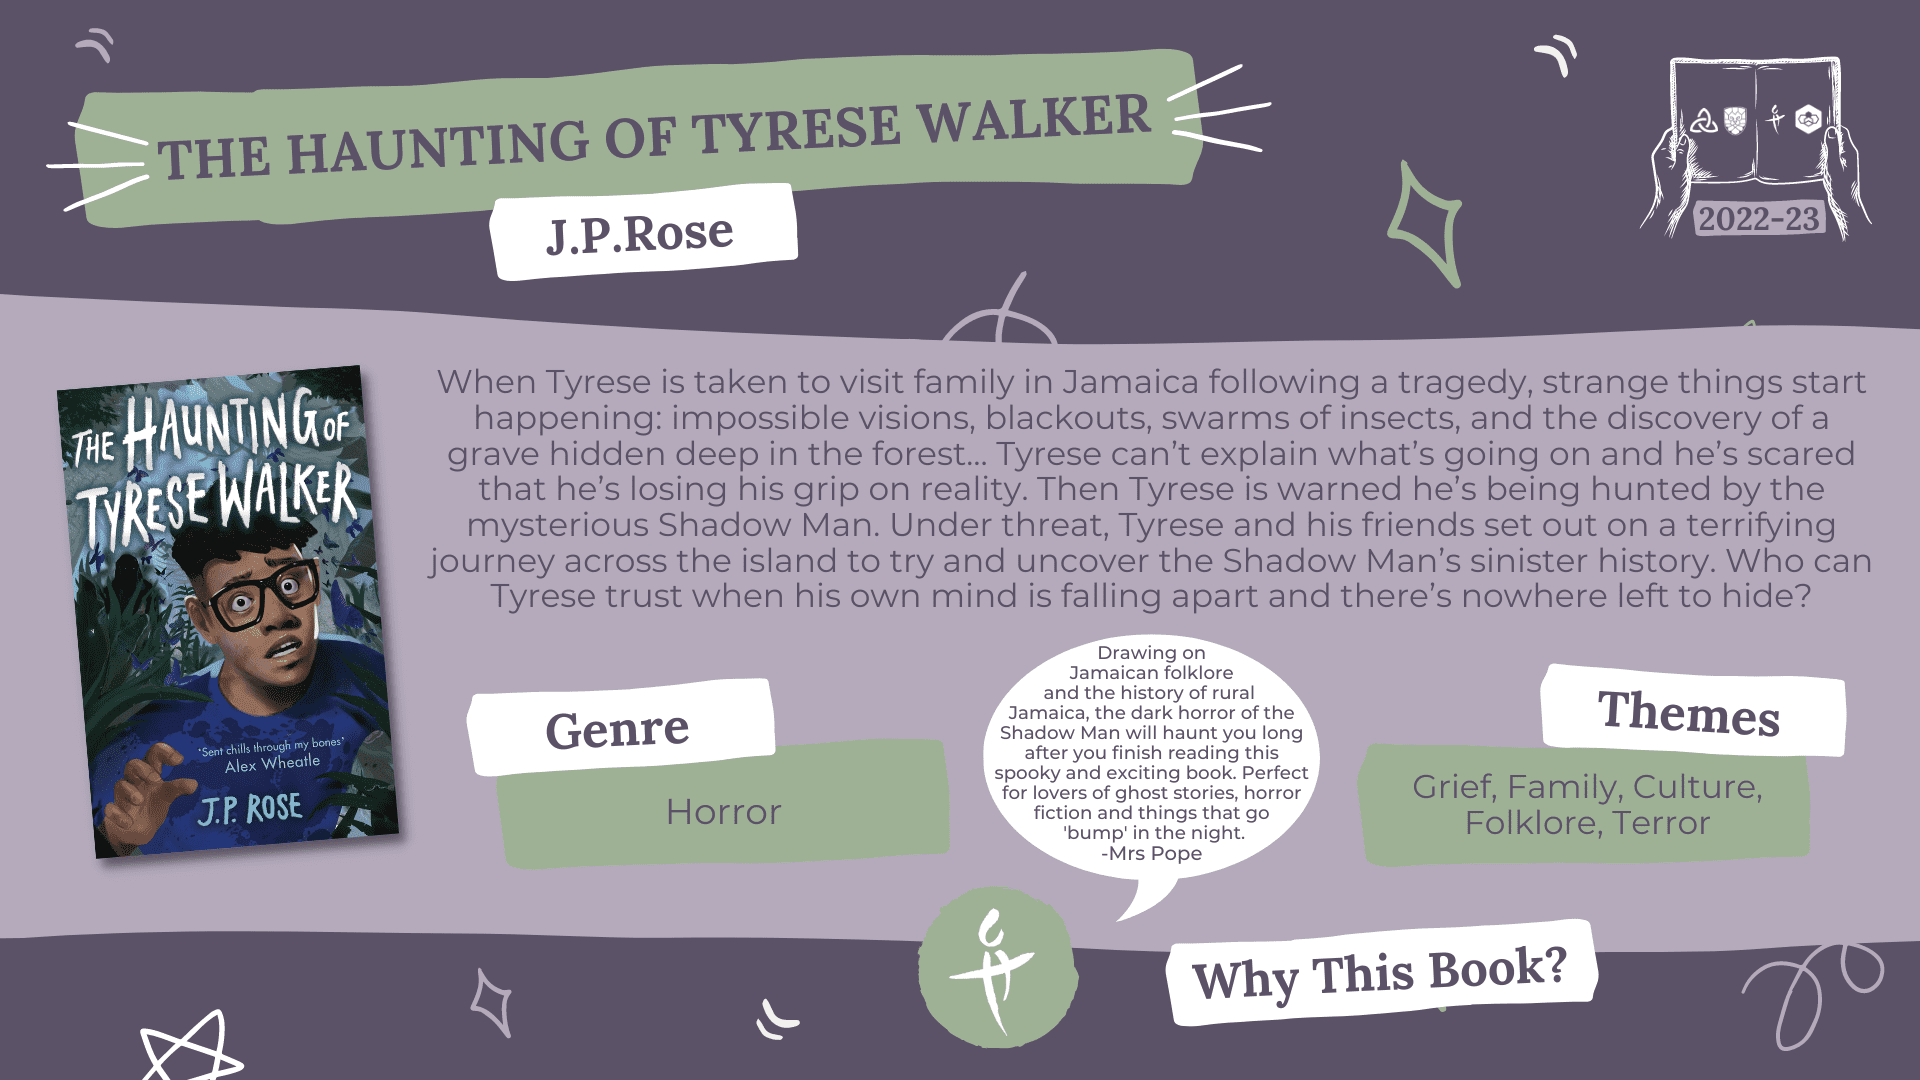 The Haunting of Tyrese Walker by J.P Rose Genre: Horror Themes: Grief, Family, Culture, Folklore, Terror Why this book?: Drawing on Jamaican folklore and the history of rural Jamaica, the dark horror of the Shadow Man will haunt you long after you finish reading this spooky and exciting book. Perfect for lovers of ghost stories, horror fiction and things that go 'bump' in the night. -Mrs Pope